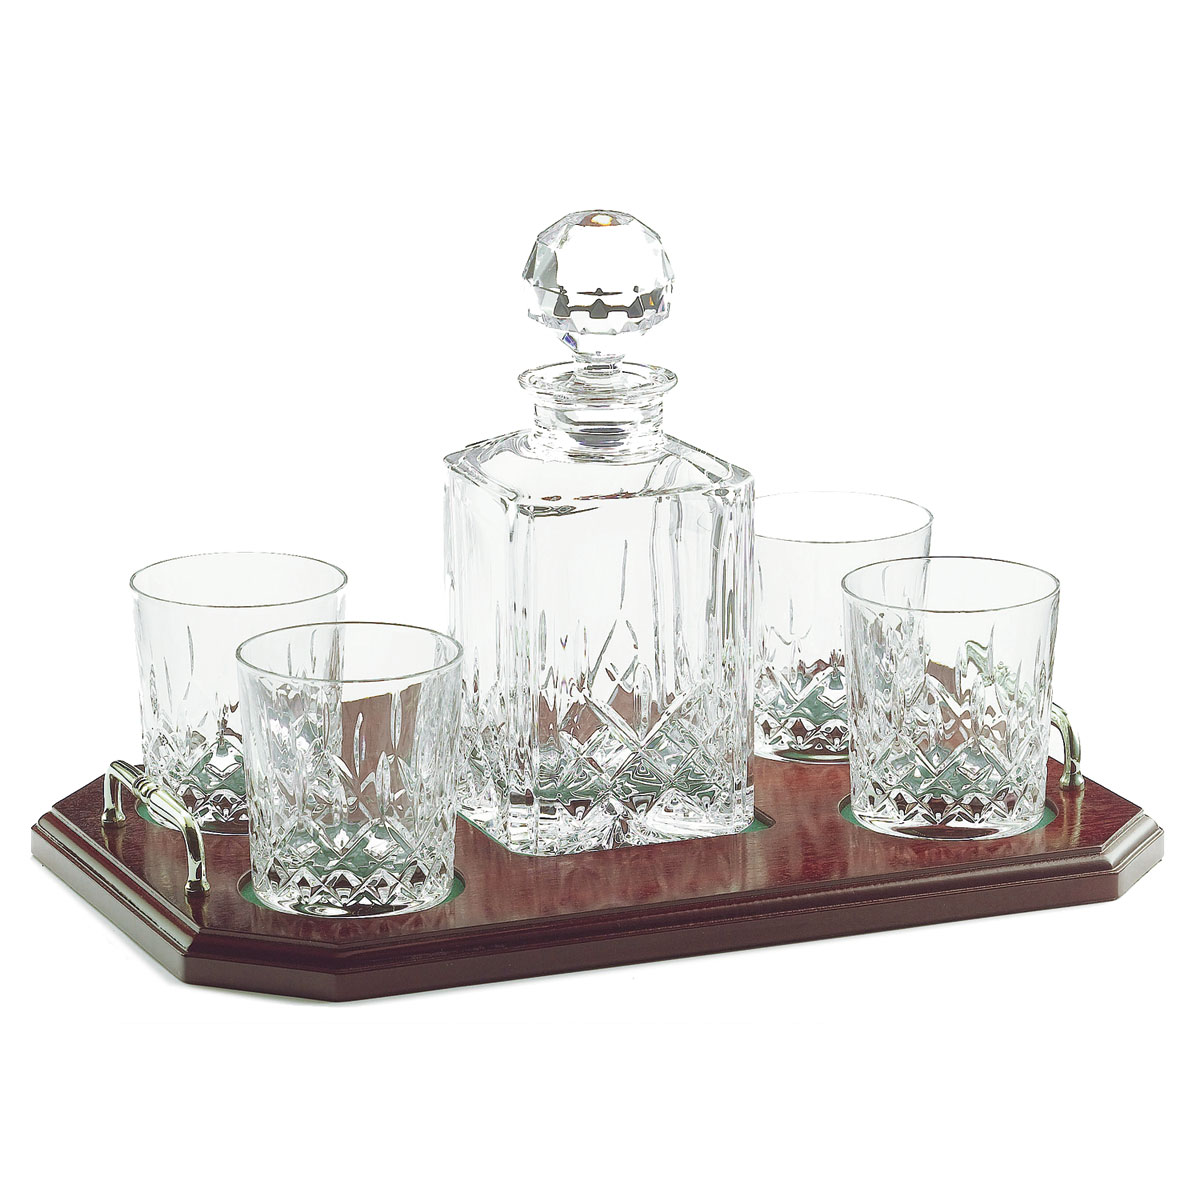 Galway Crystal Longford Square Decanter Tray Set